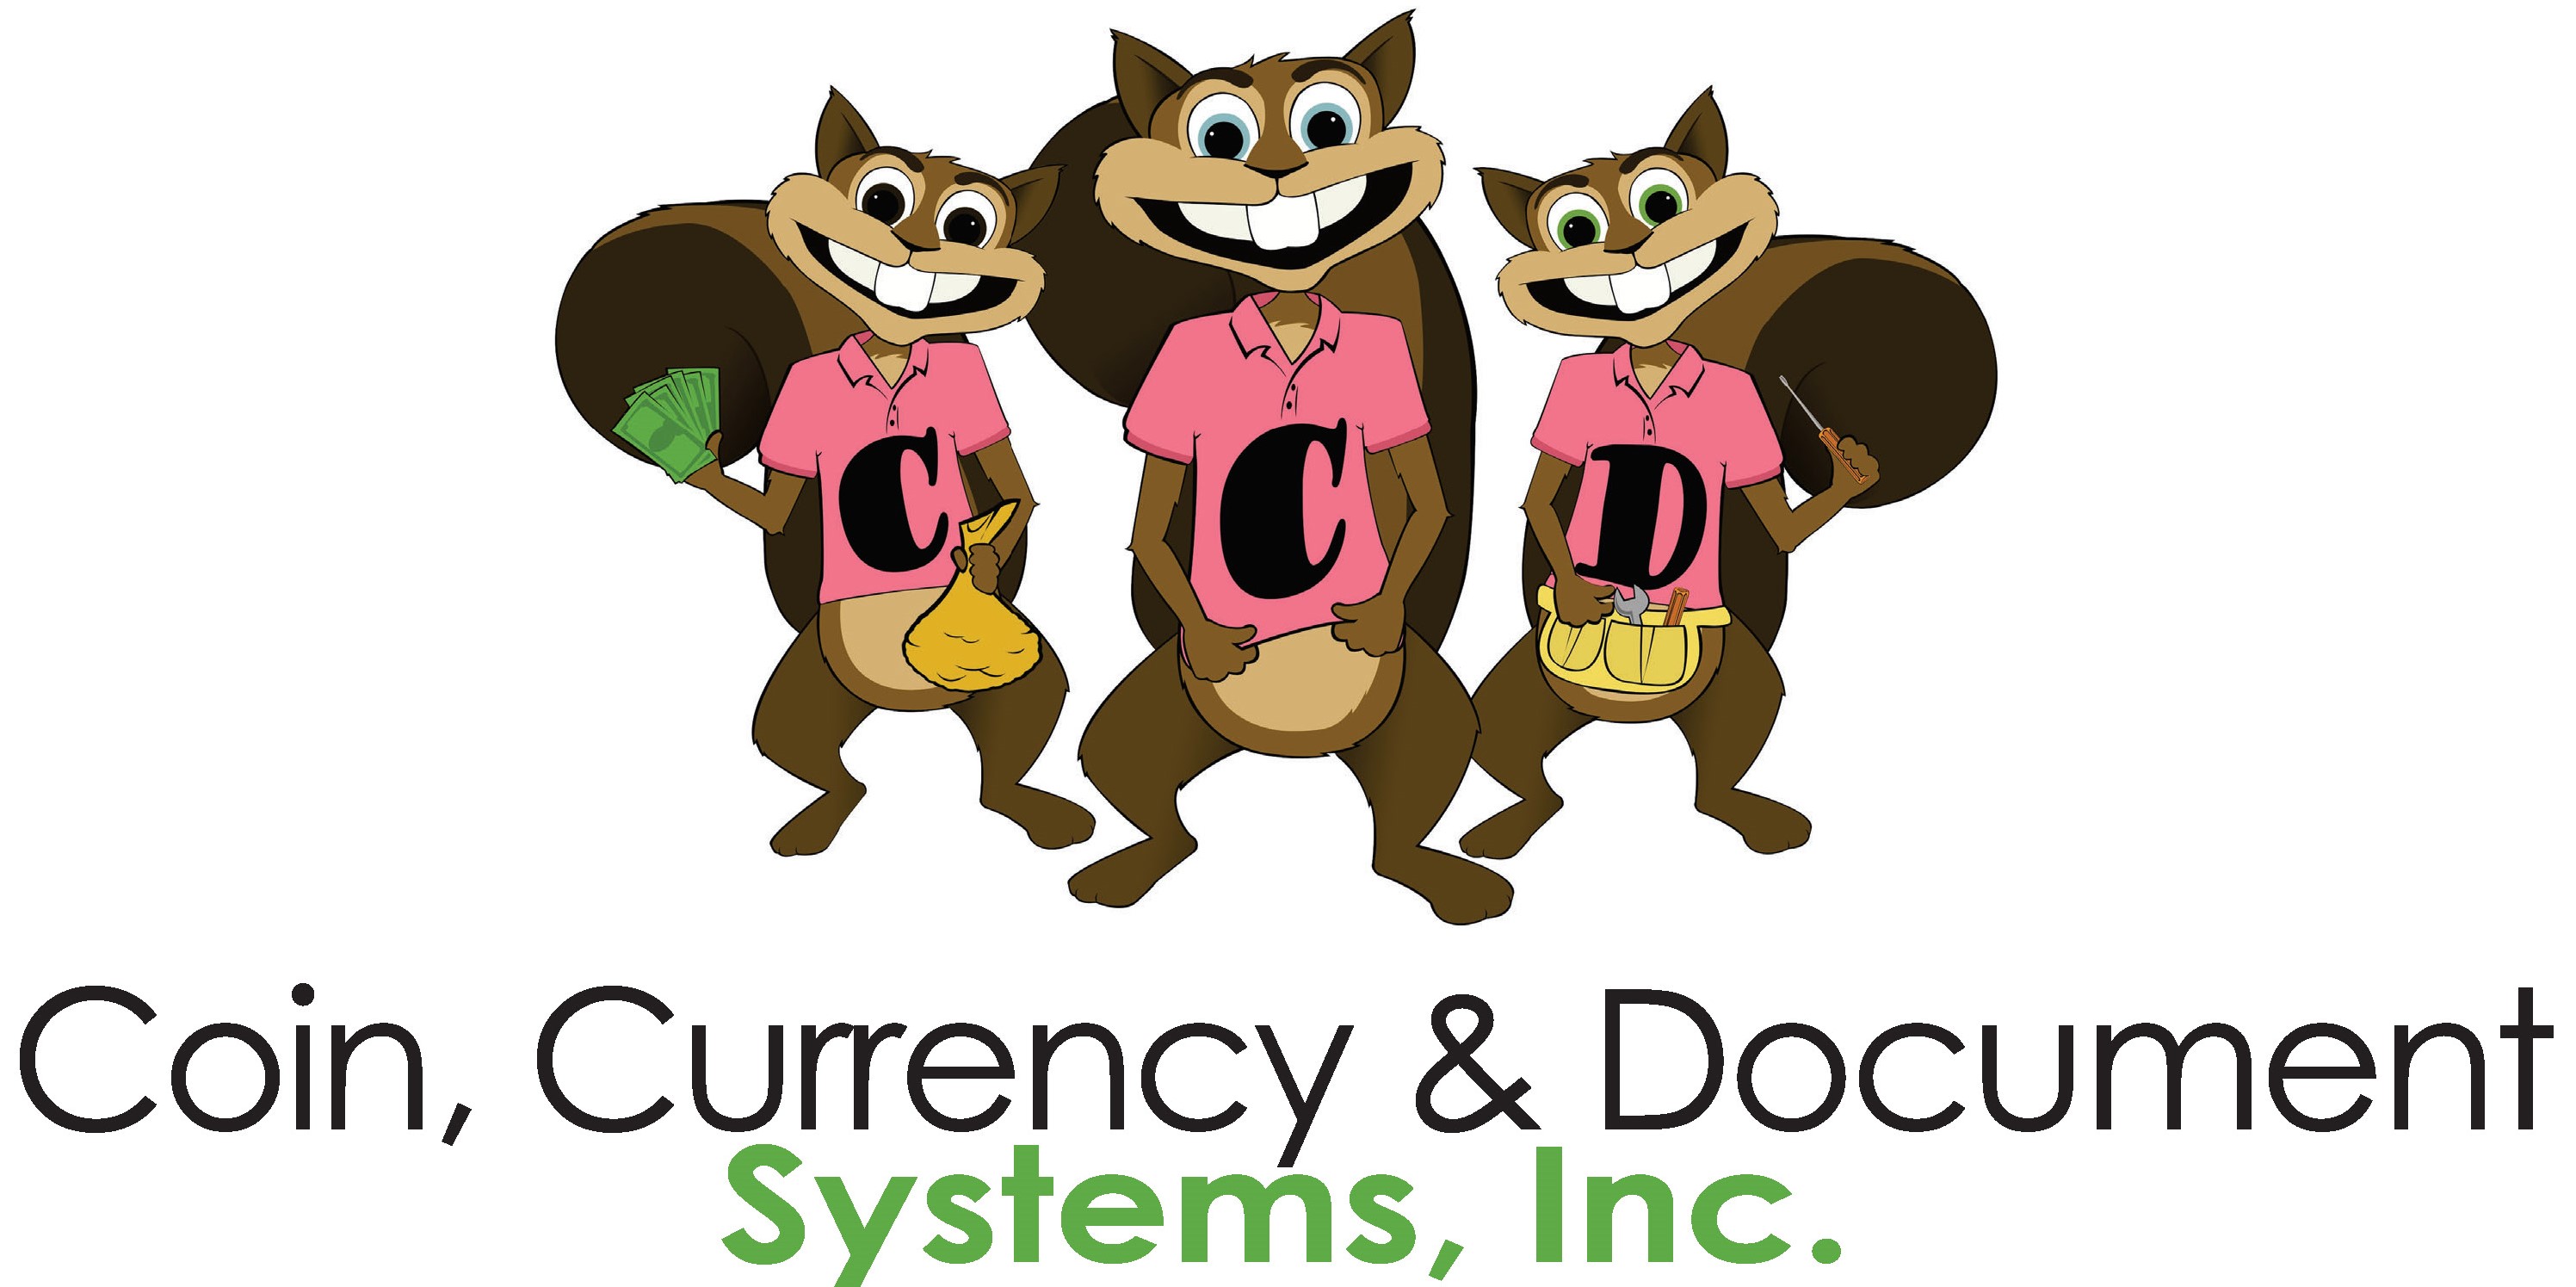 Coin, Currency & Document Systems of Flo